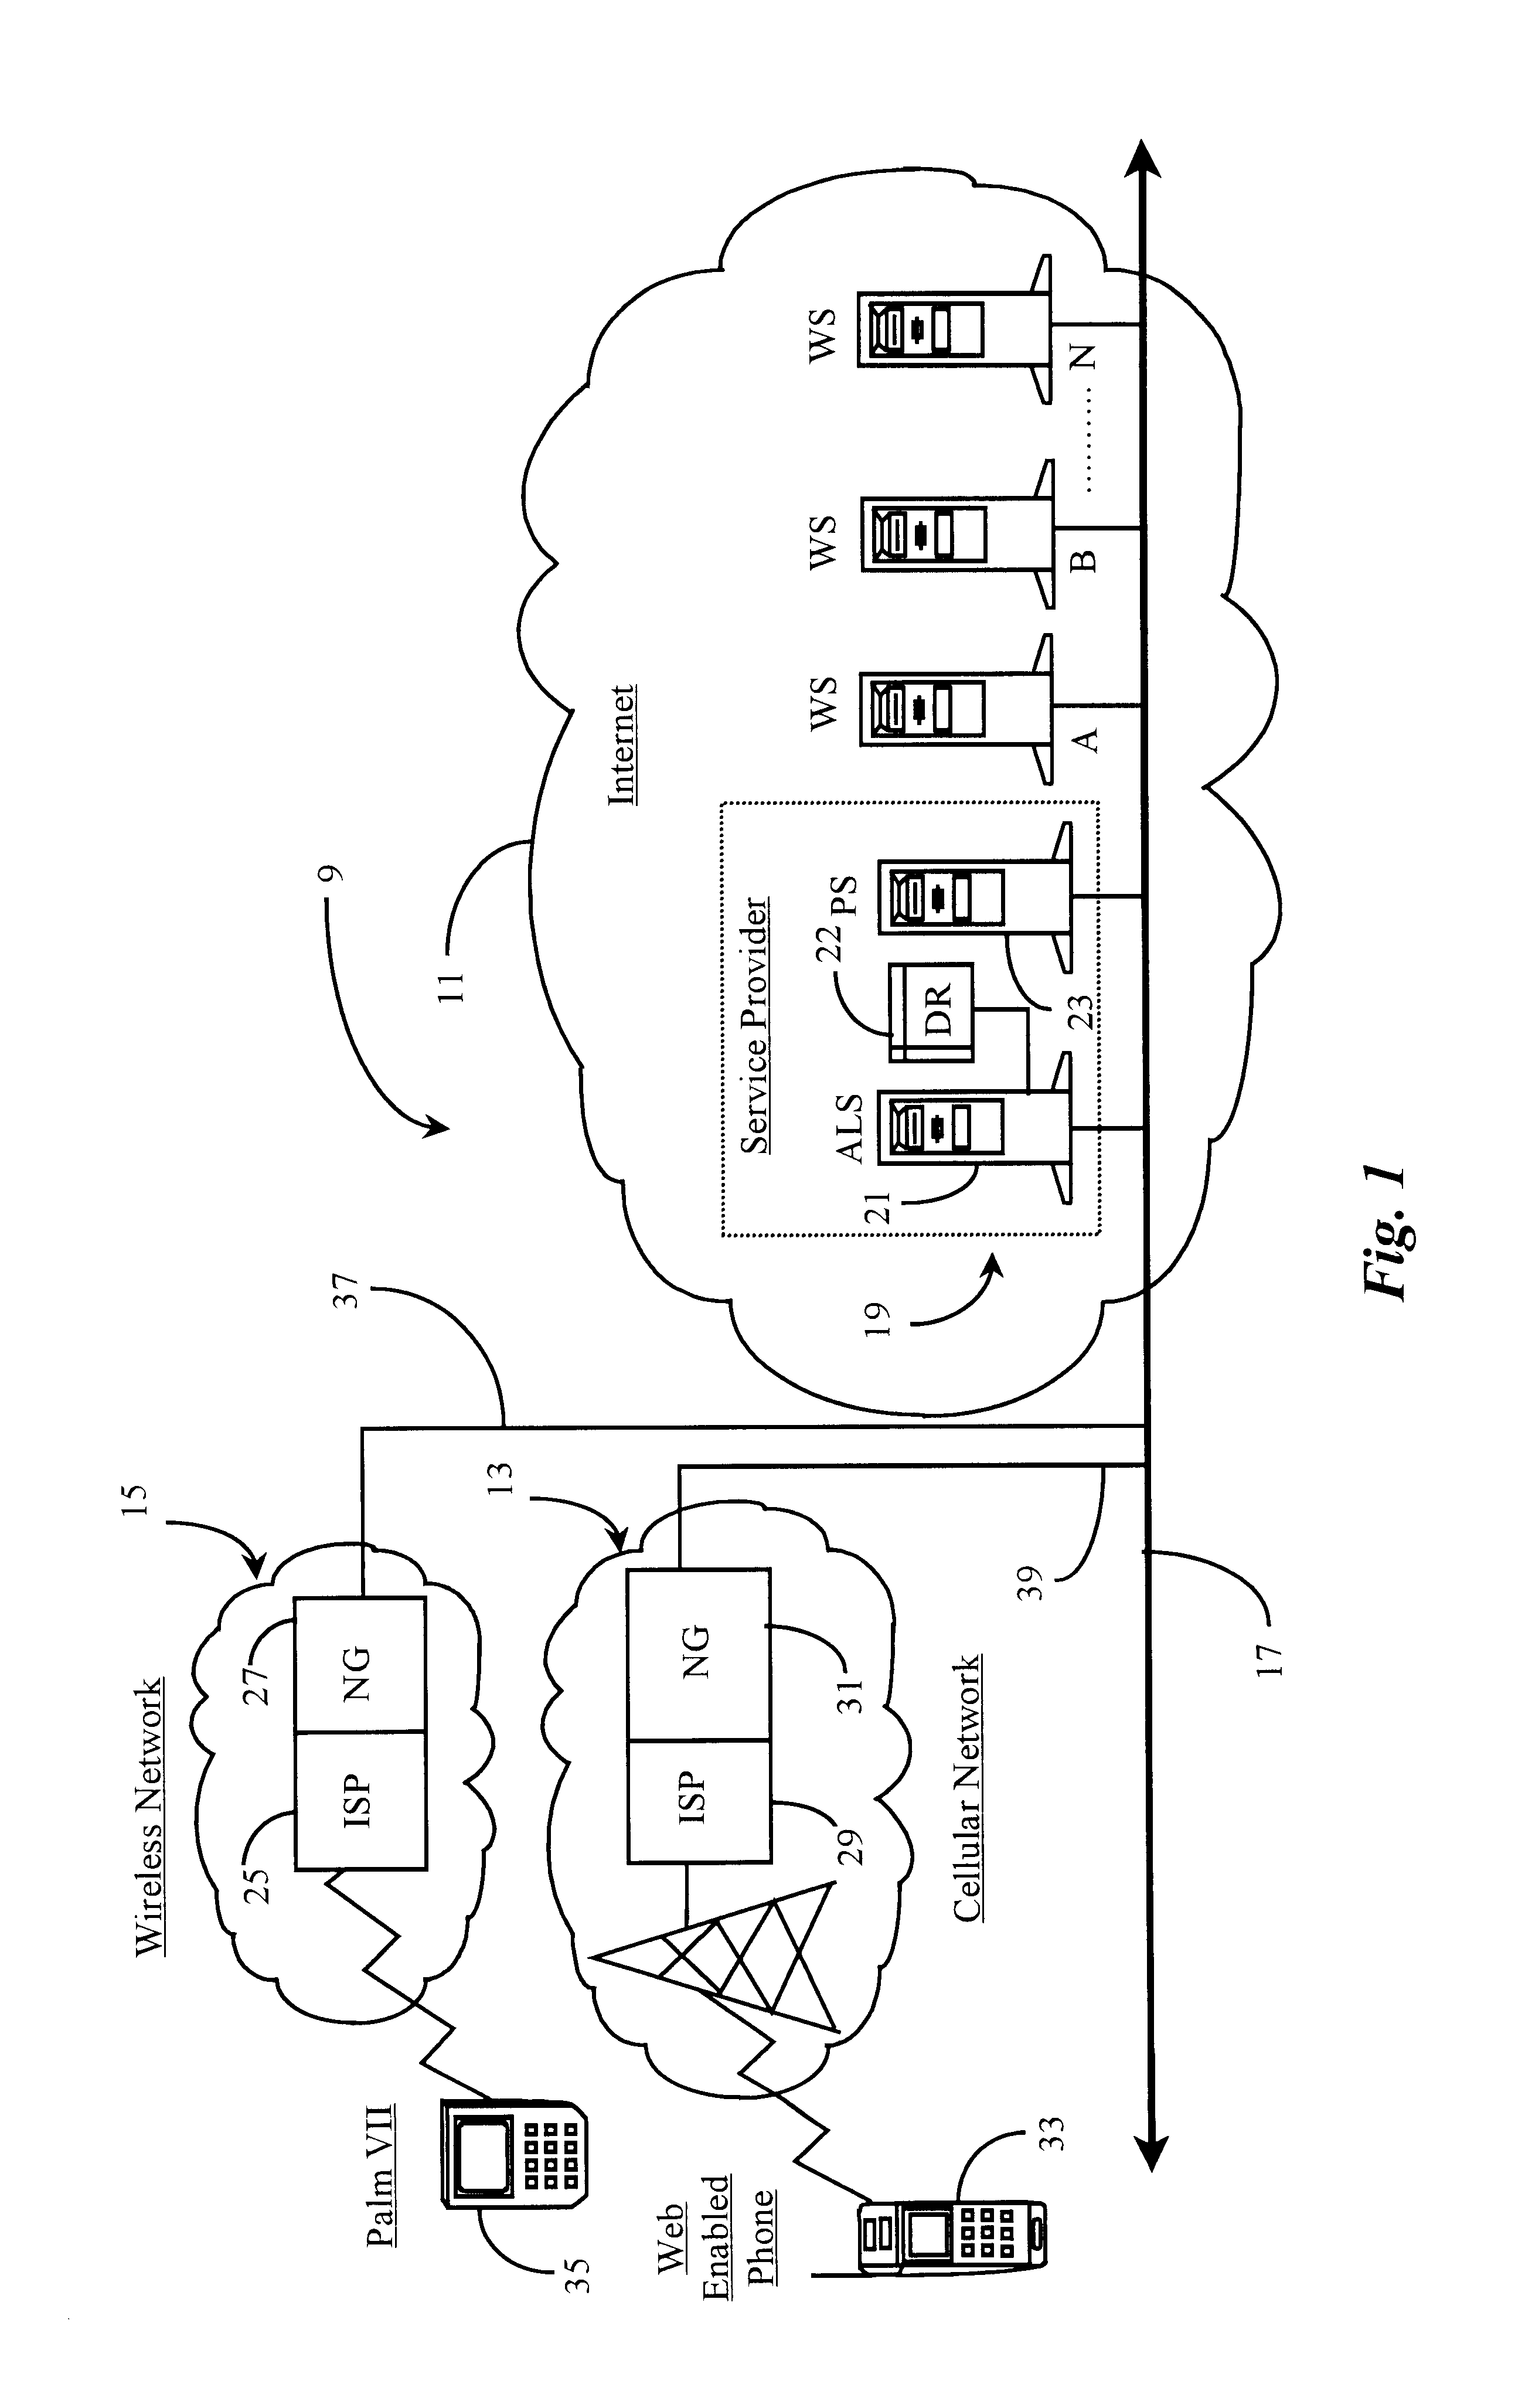 Method and apparatus enabling automatic login for wireless internet-capable devices